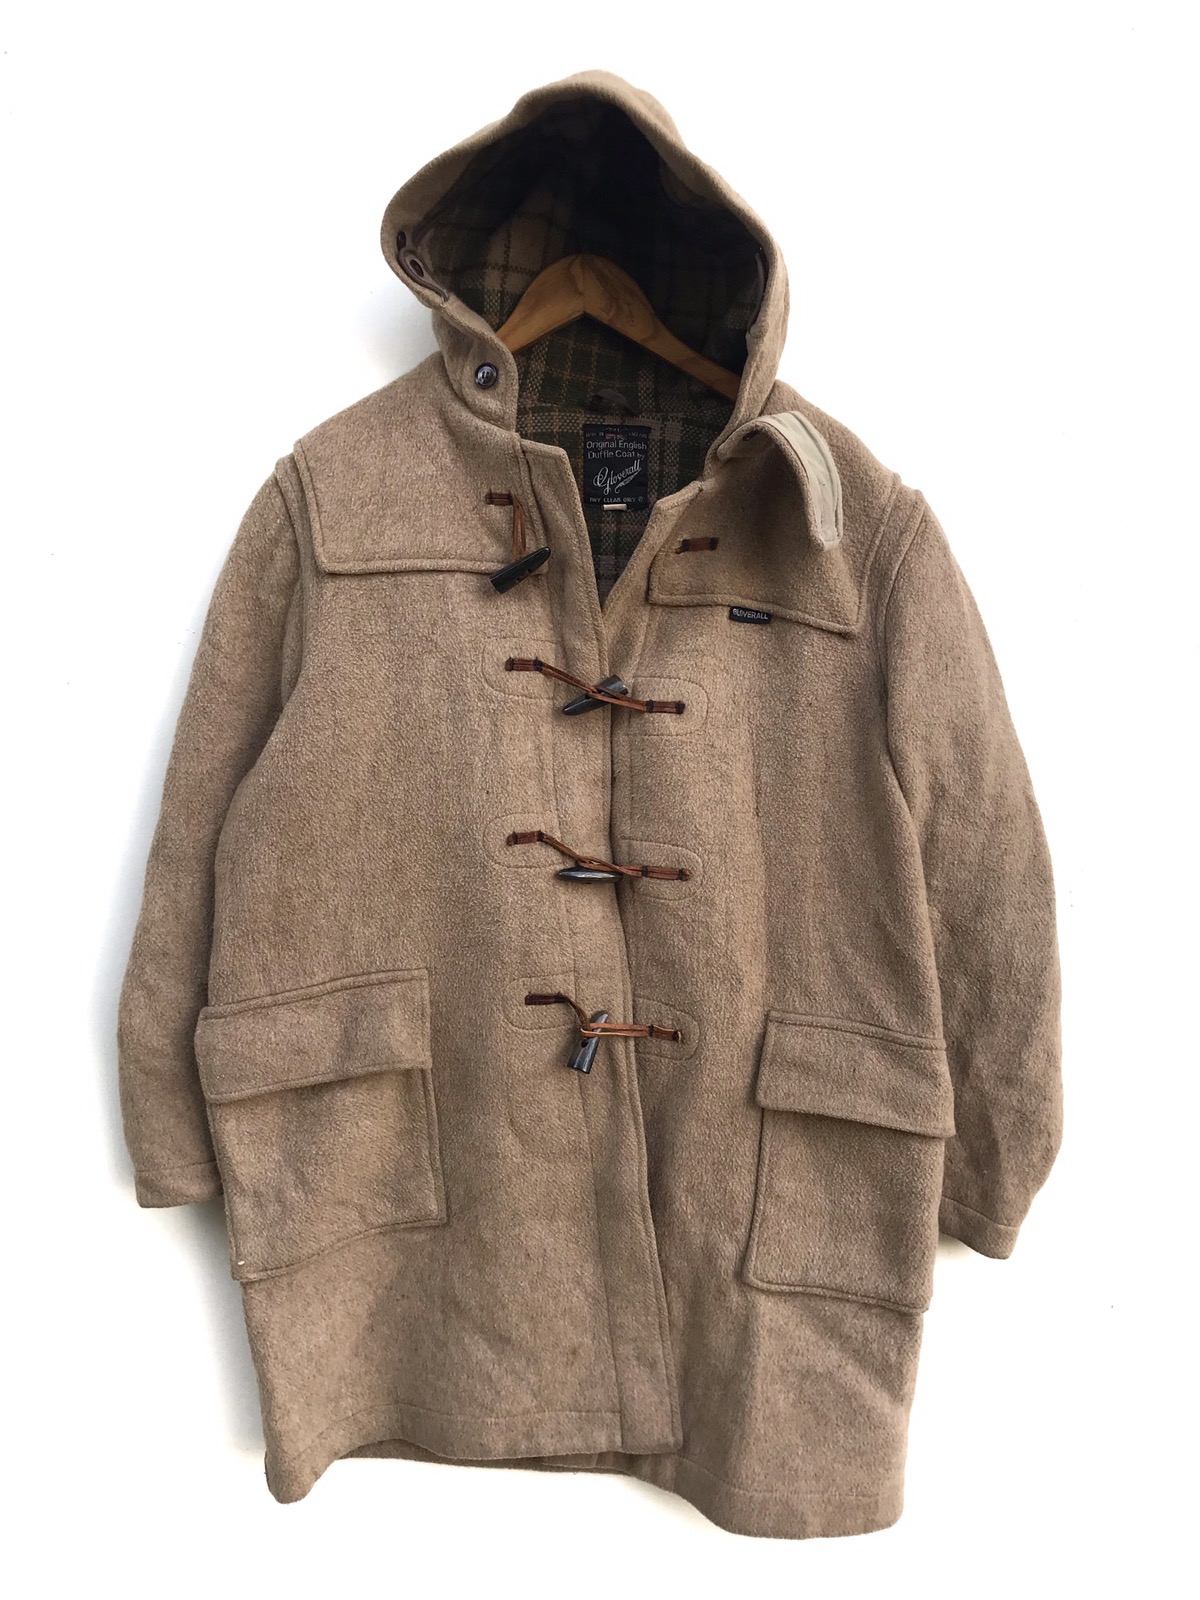 Gloverall - Vintage Made in England Gloveral Wool Duffle Heavy Coat - 1